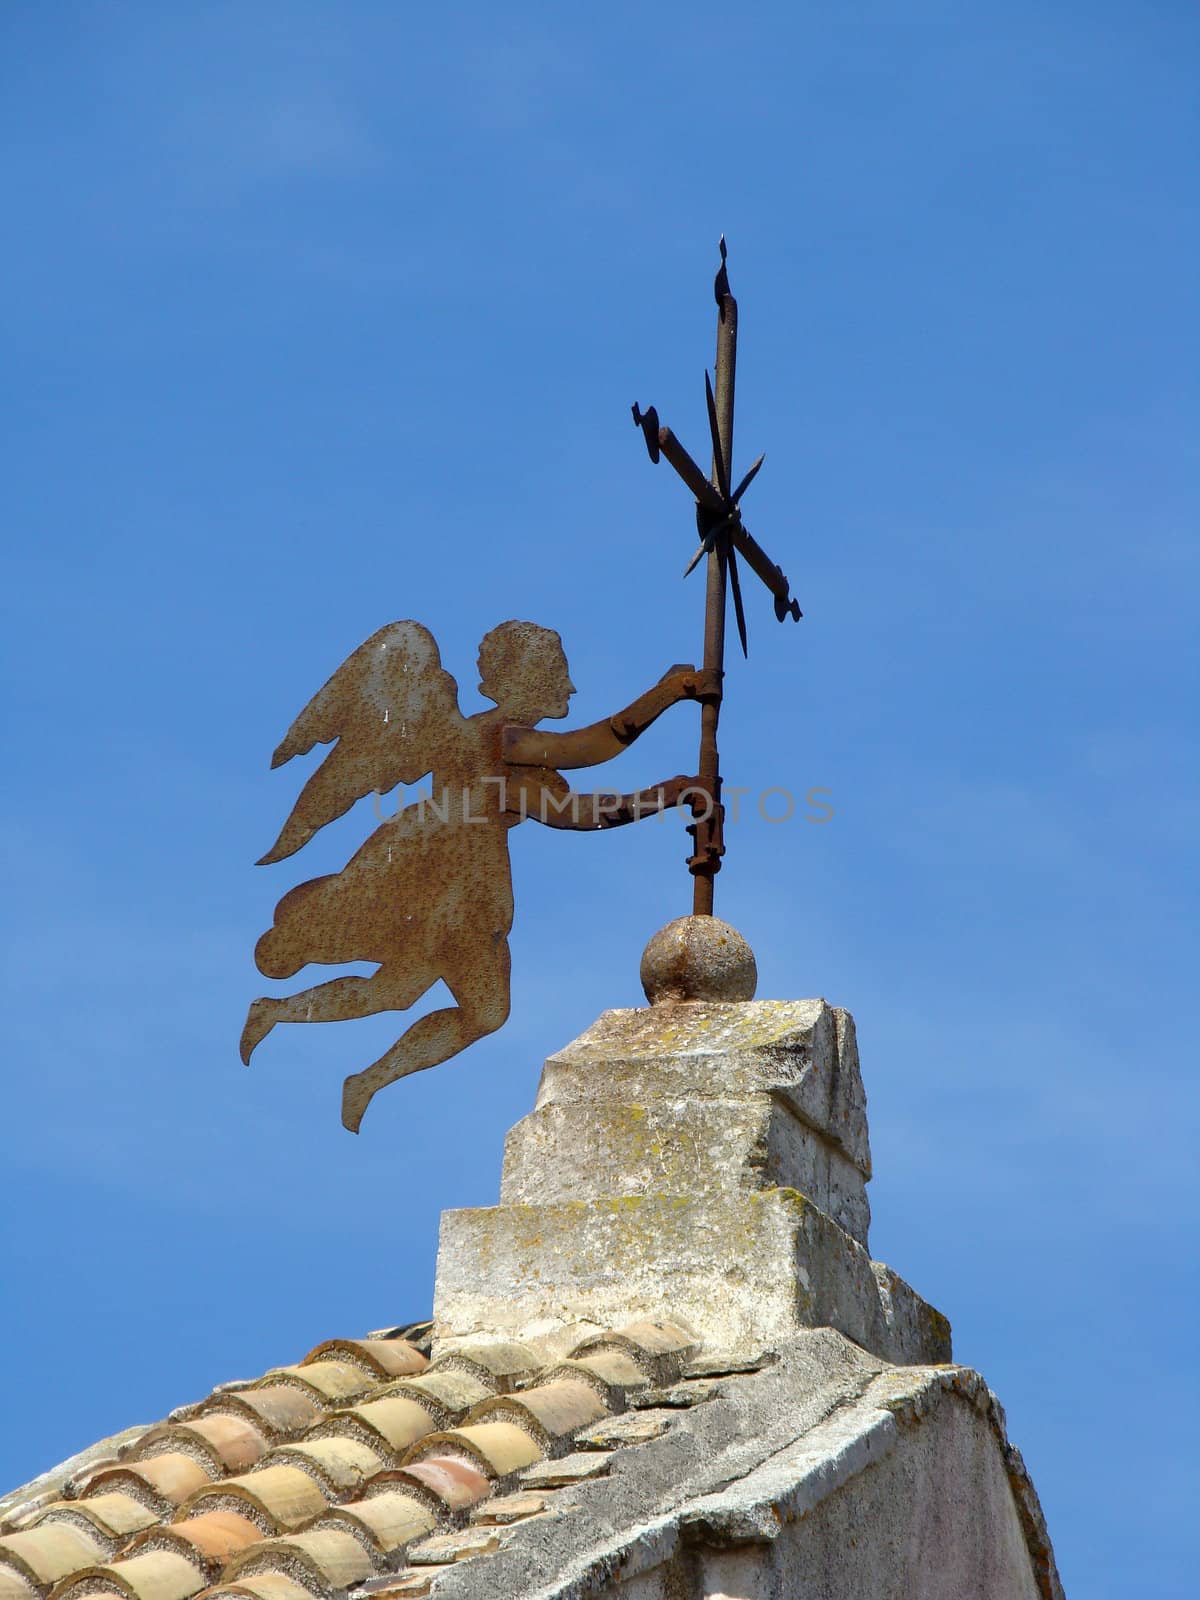 
angel holding cross on roof of the church in small town in Apulia in Italy.